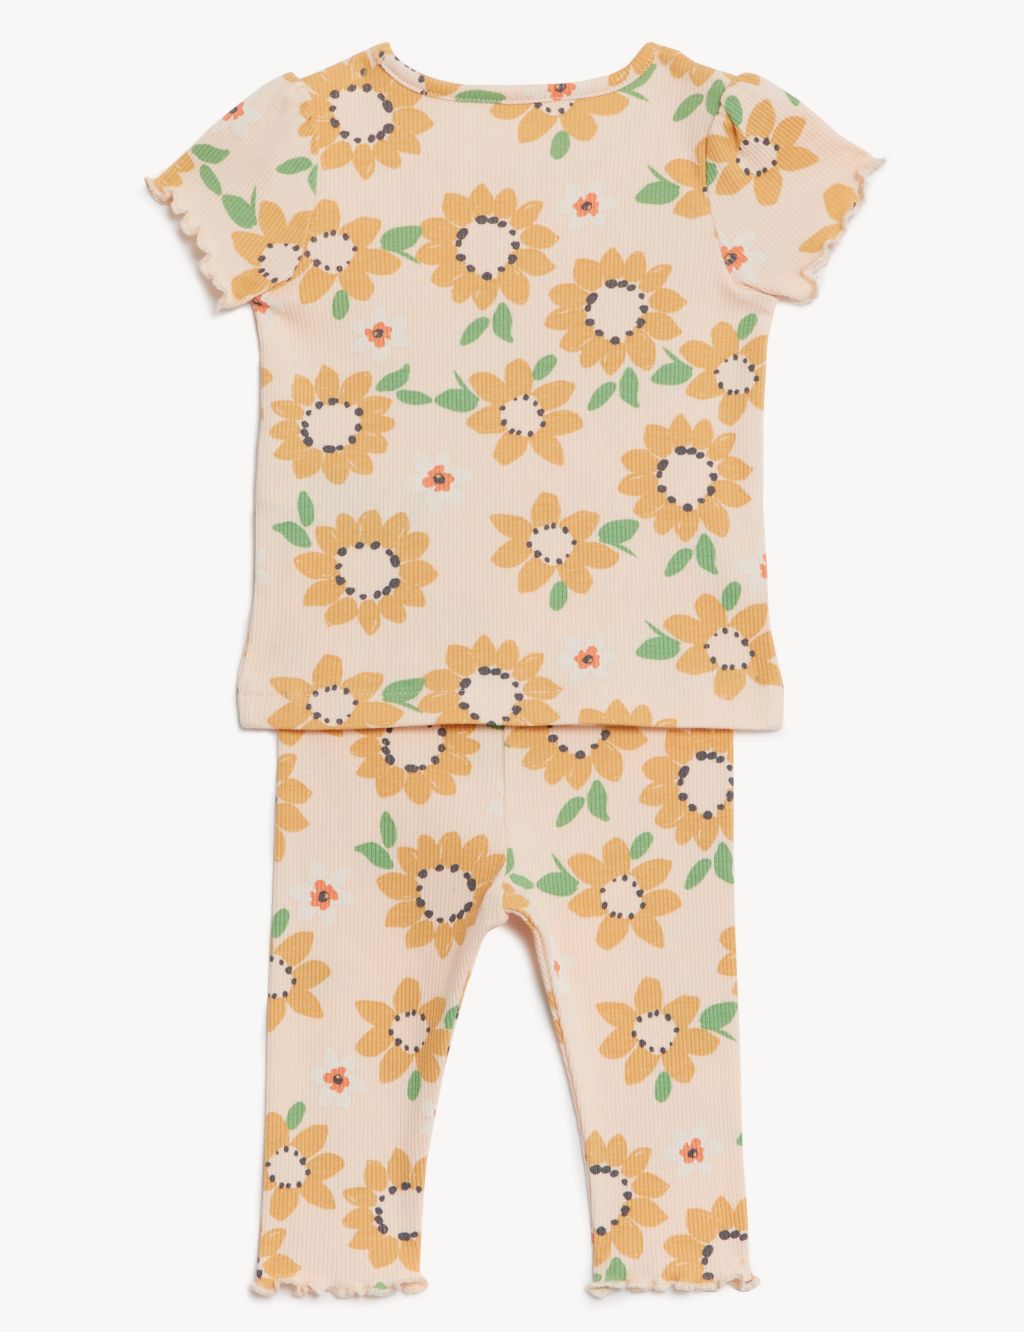 2pc Cotton Rich Sunflower Outfit (0-3 Yrs) image 2